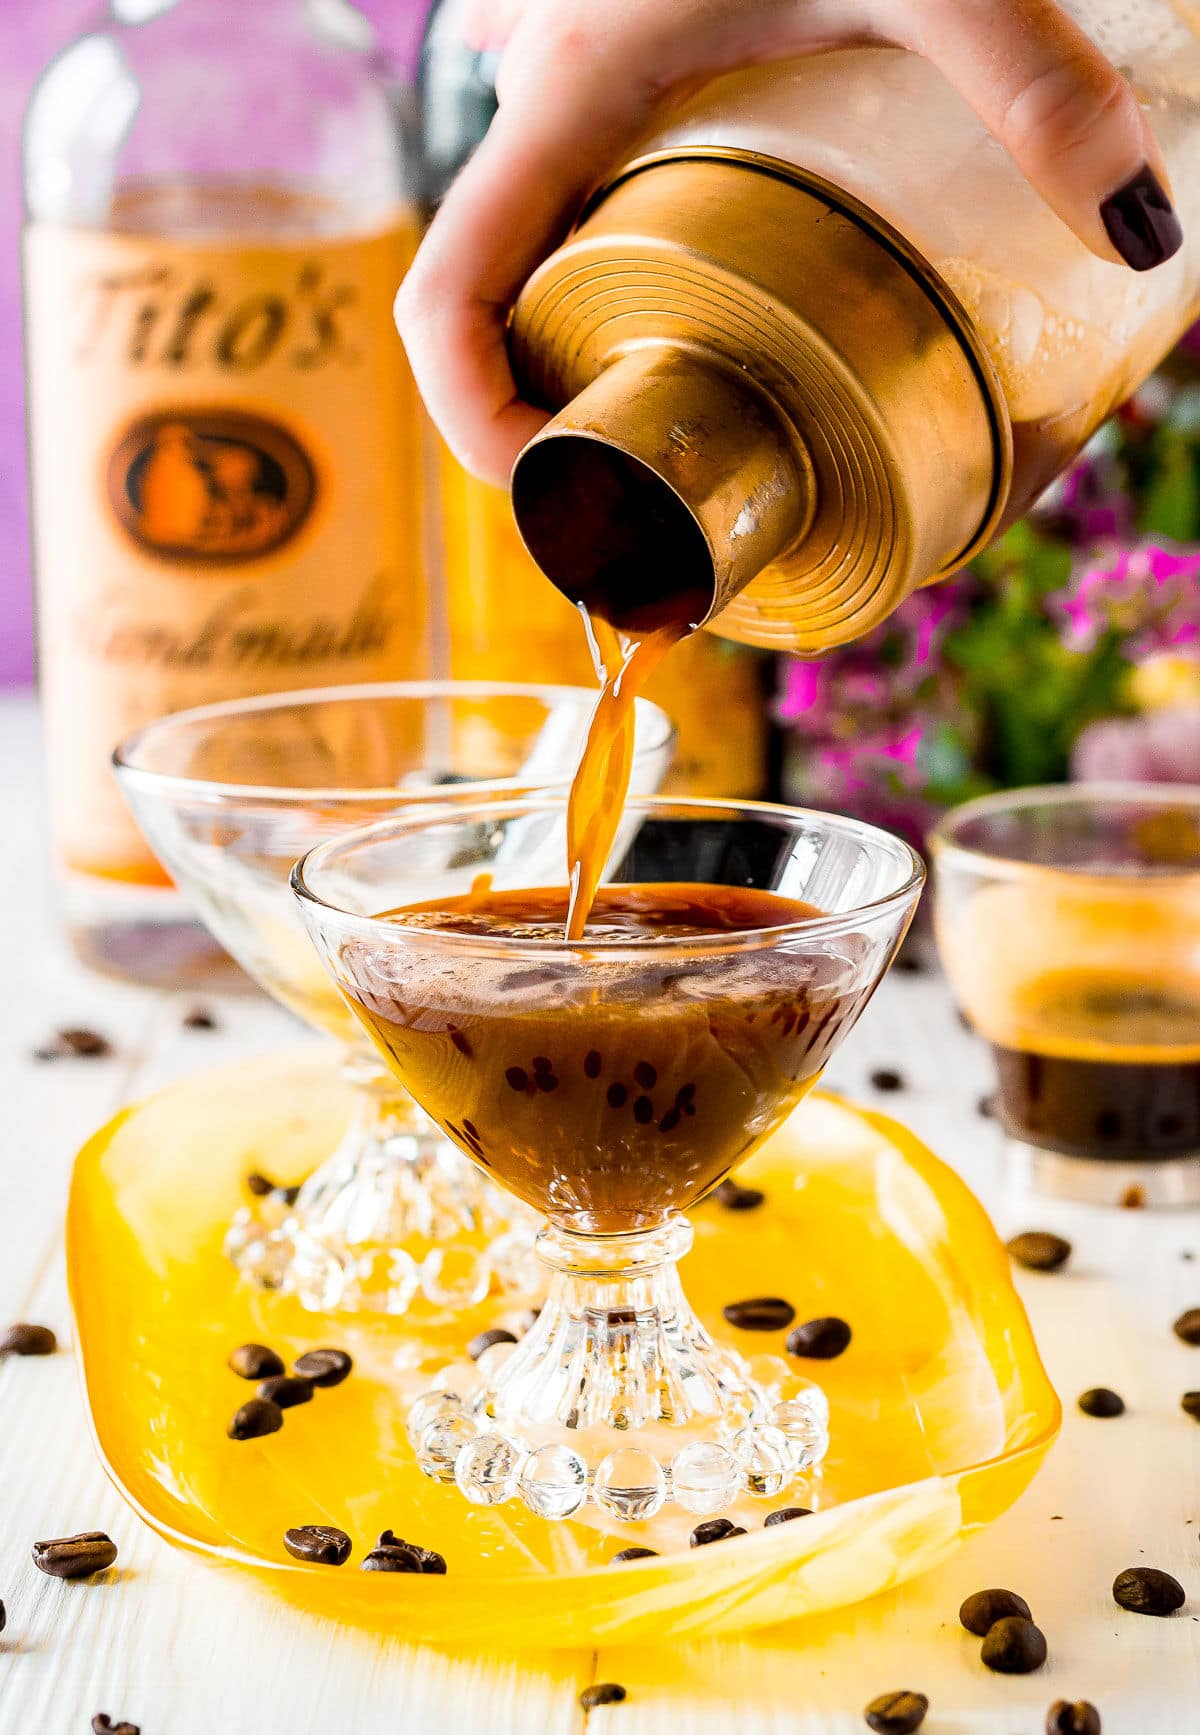 espresso martini being poured into glass from gold rimmed shaker